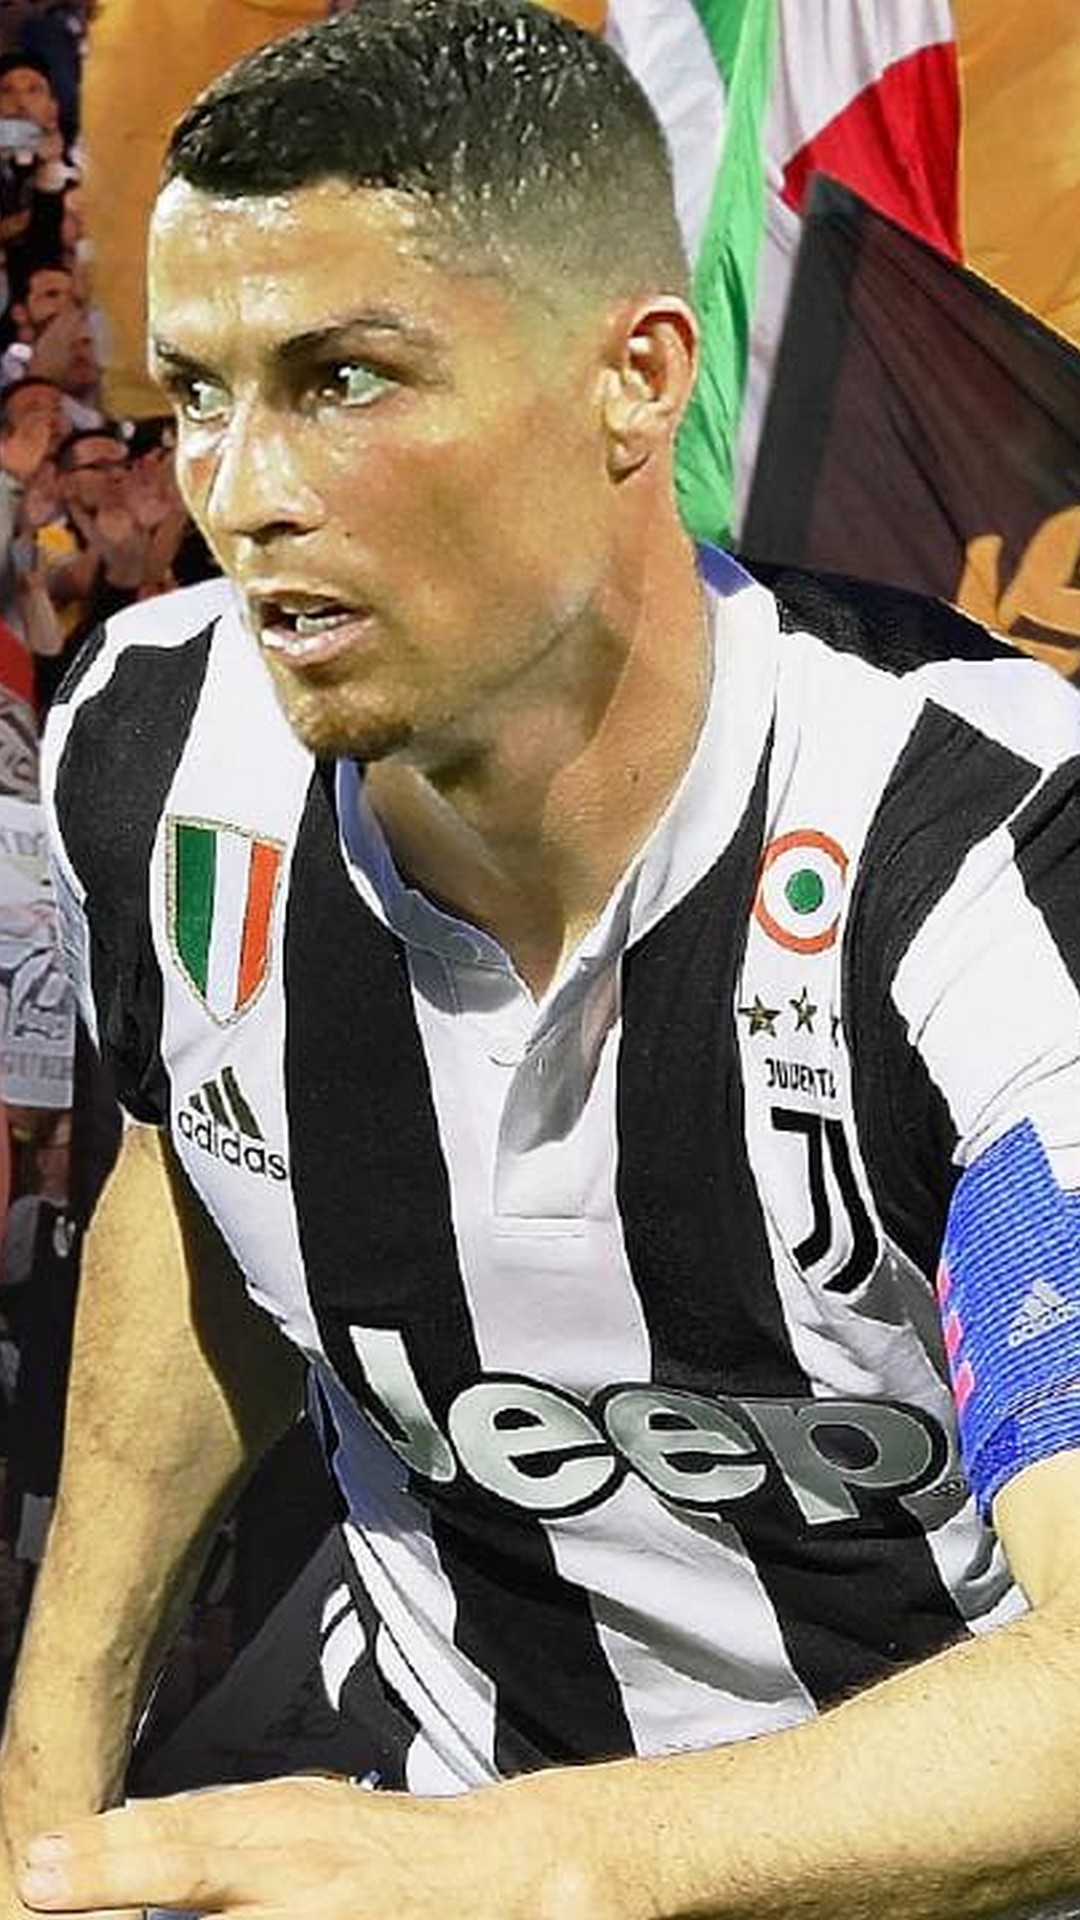 Wallpaper Android CR7 Juventus with resolution 1080X1920 pixel. You can make this wallpaper for your Android backgrounds, Tablet, Smartphones Screensavers and Mobile Phone Lock Screen